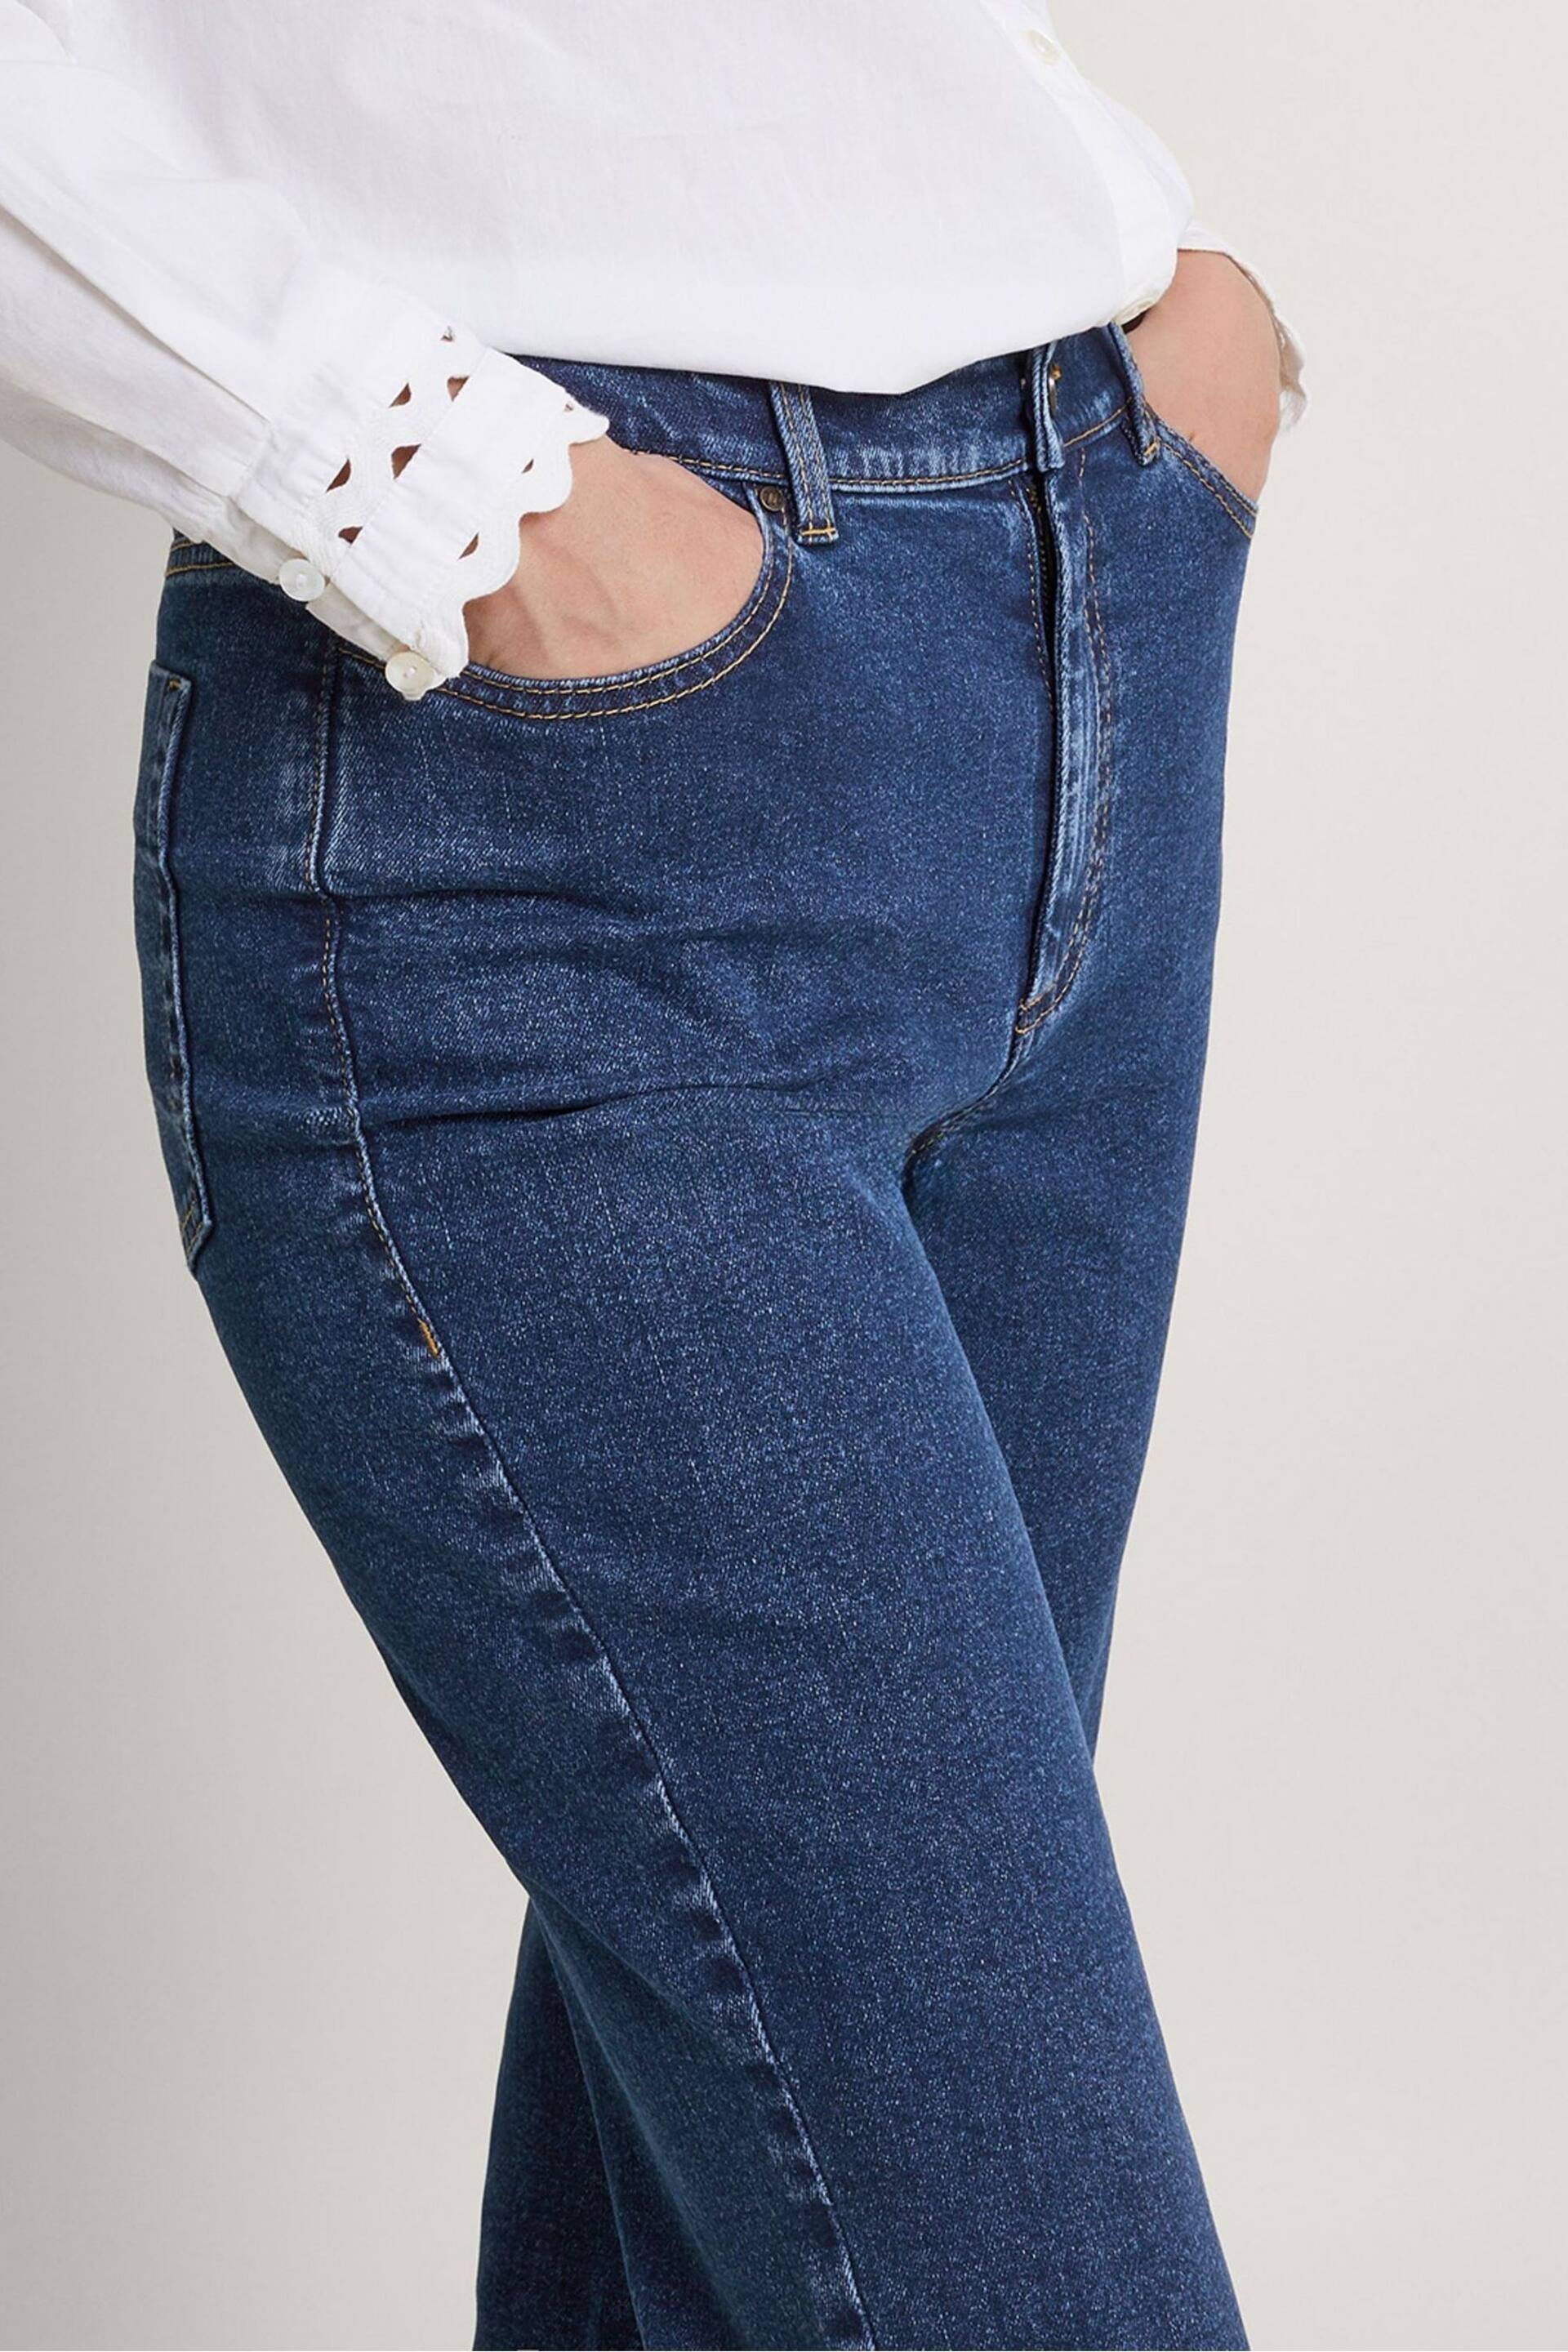 Monsoon Blue Alice Straight Jeans - Image 4 of 5